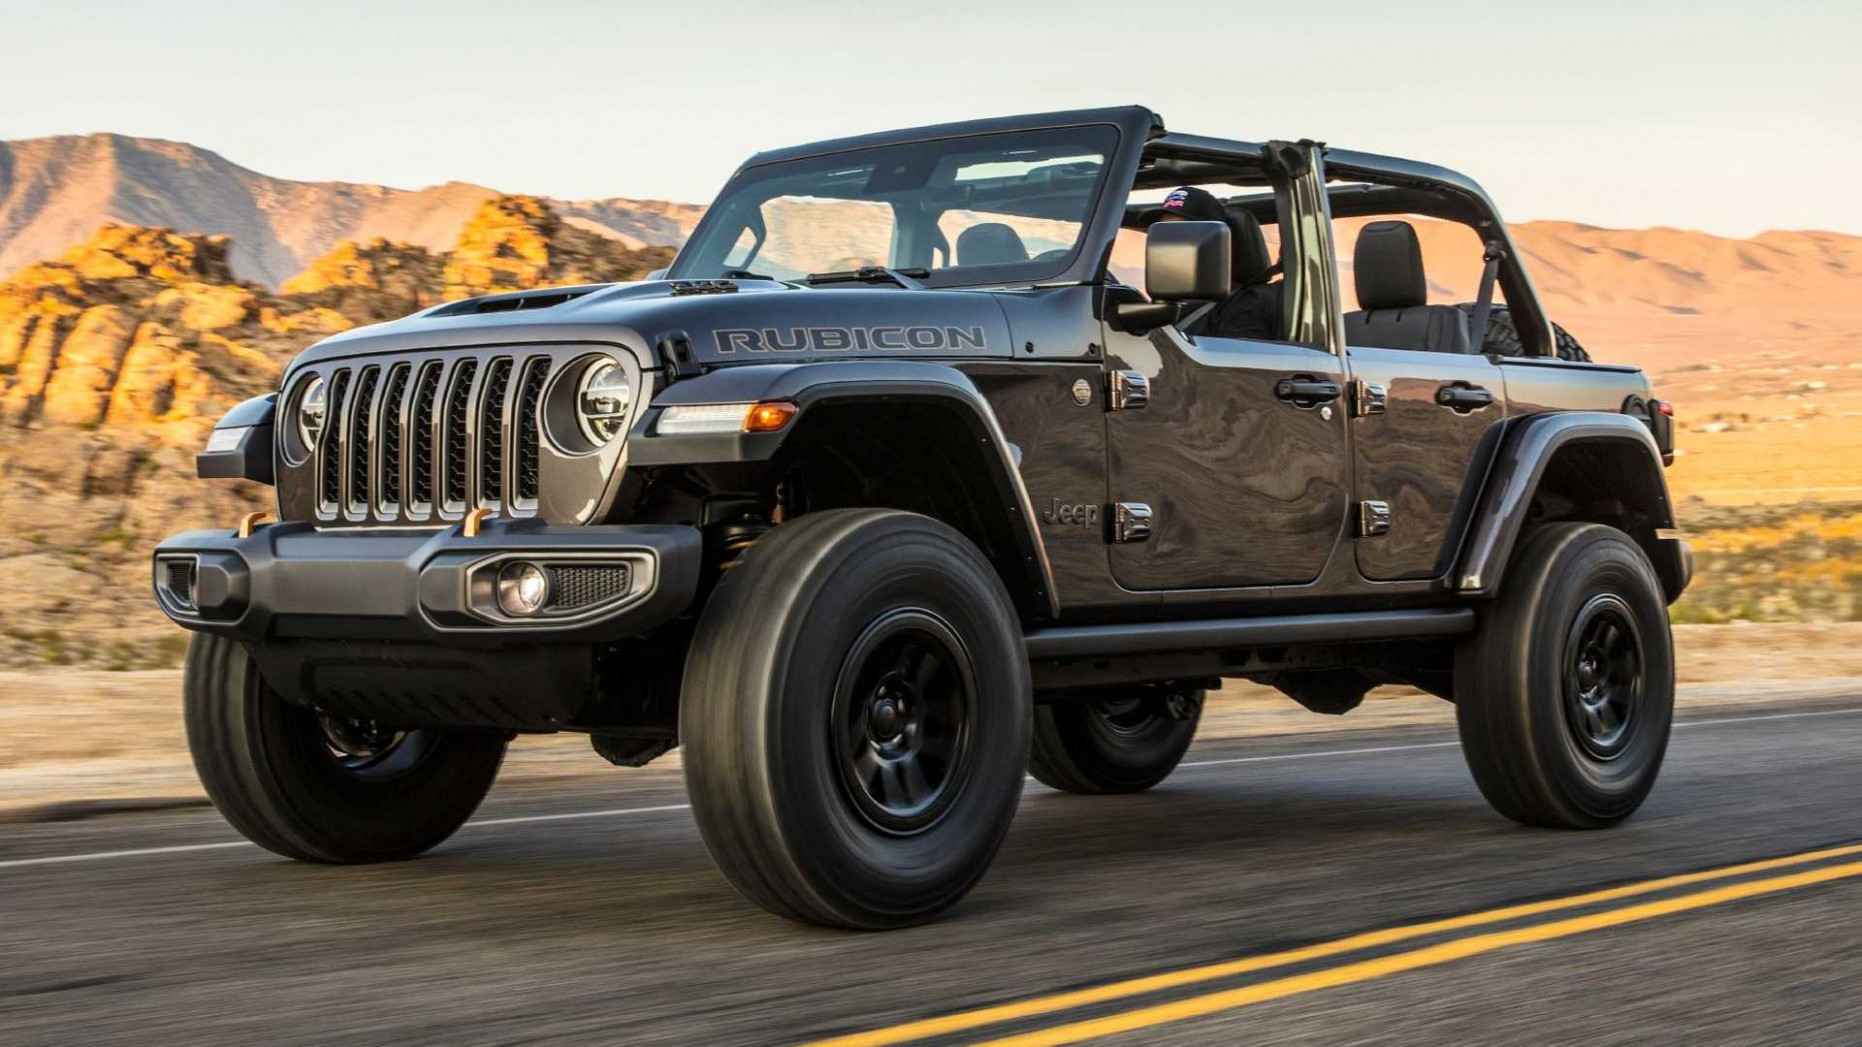 Redesign and Concept Jeep Wrangler 2022 Price